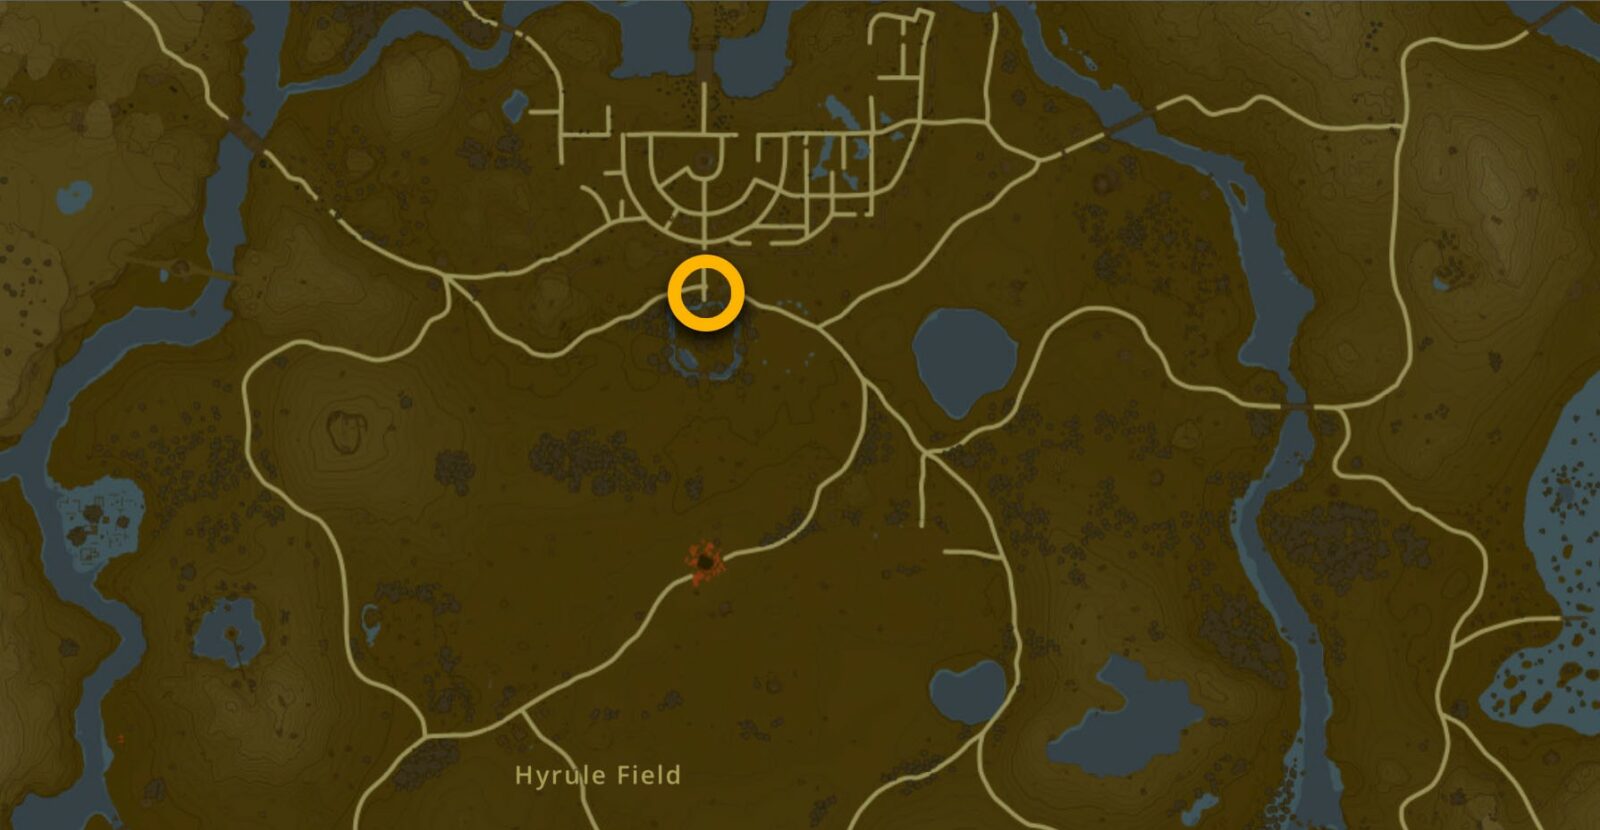 Deal With The Statue quest location in Tears of the Kingdom